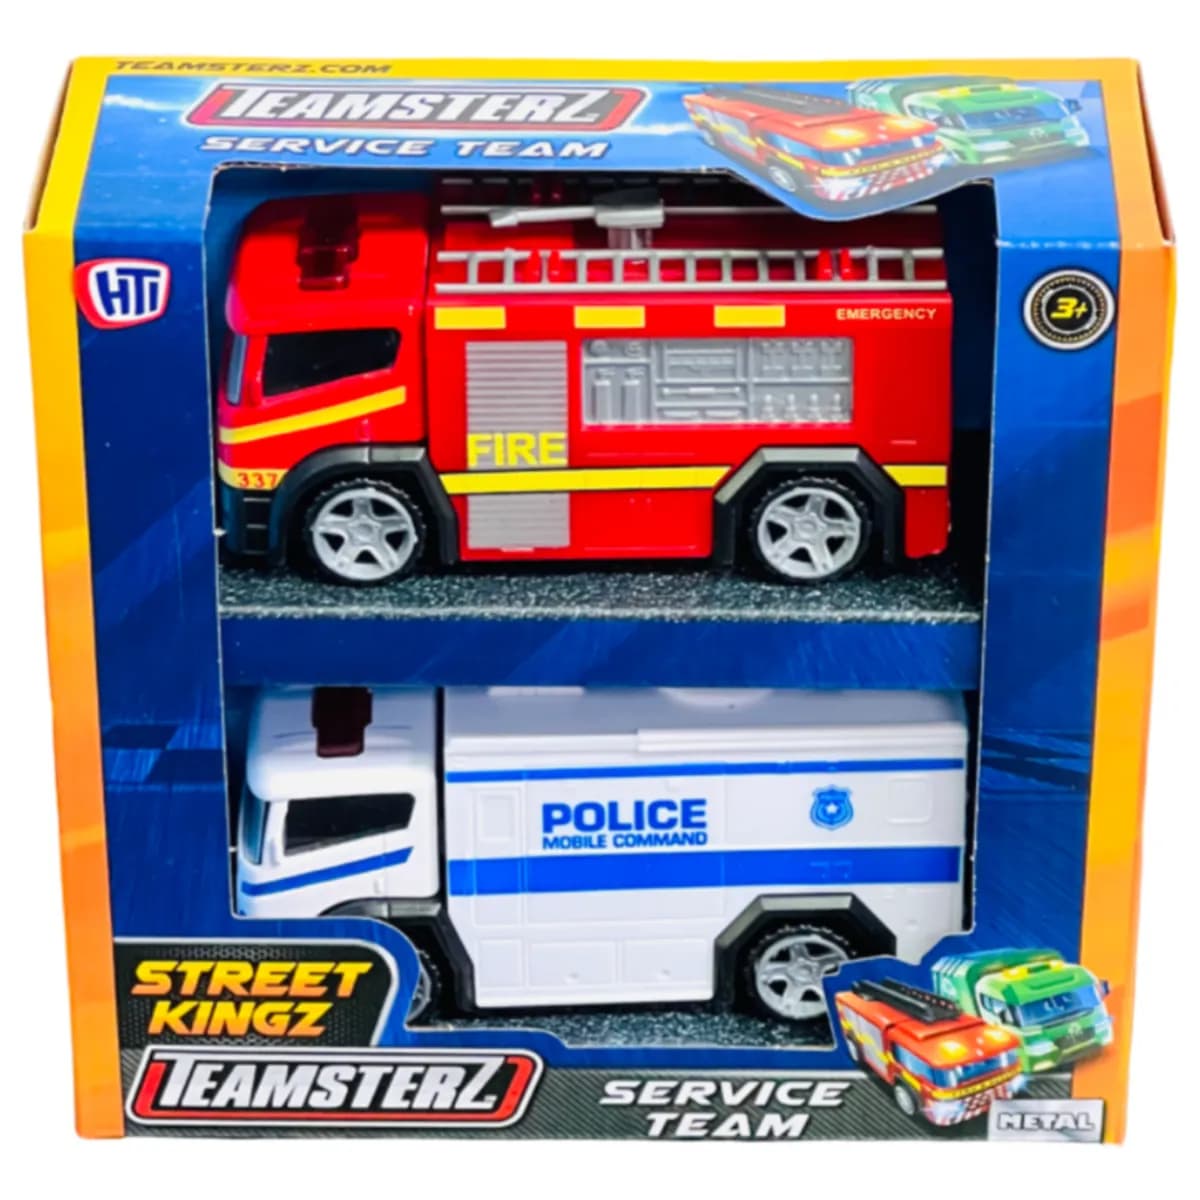 Teamsterz Street Kingz Service Rescue Vehicle Play Set For Kids - Pack Of  2  (VLLT26)